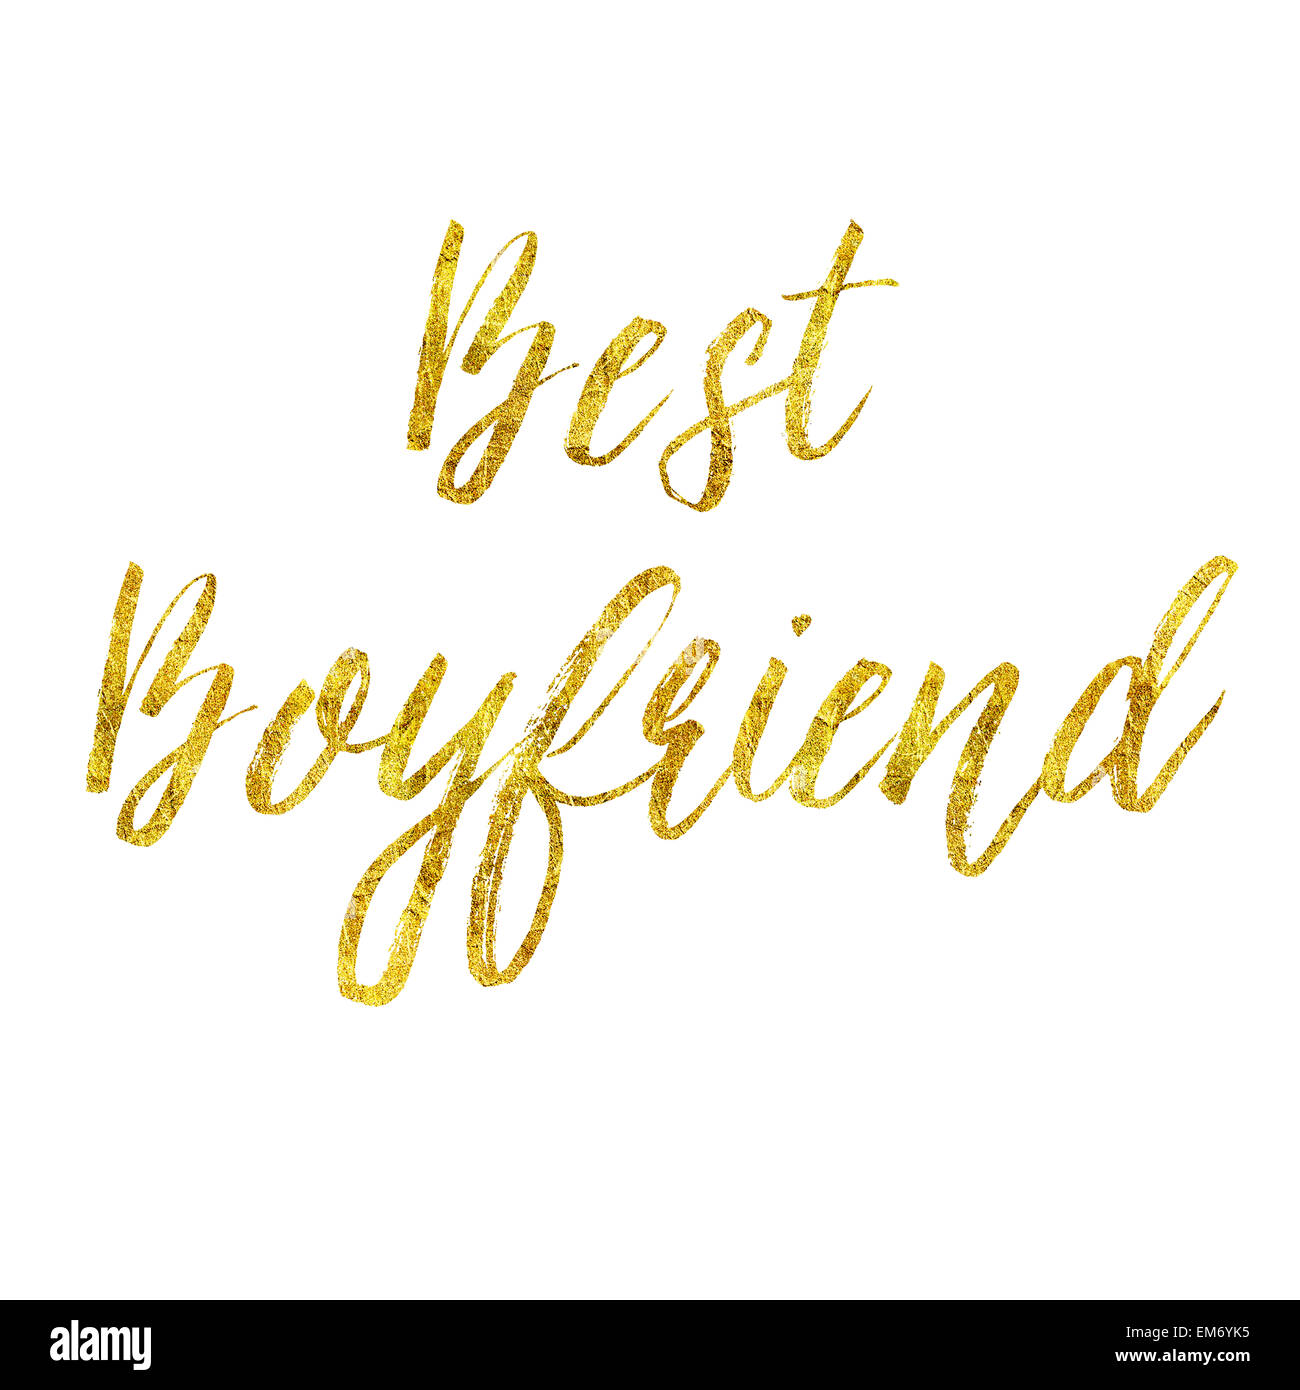 Best Boyfriend Gold Faux Foil Metallic Glitter Quote Isolated on White Background Stock Photo